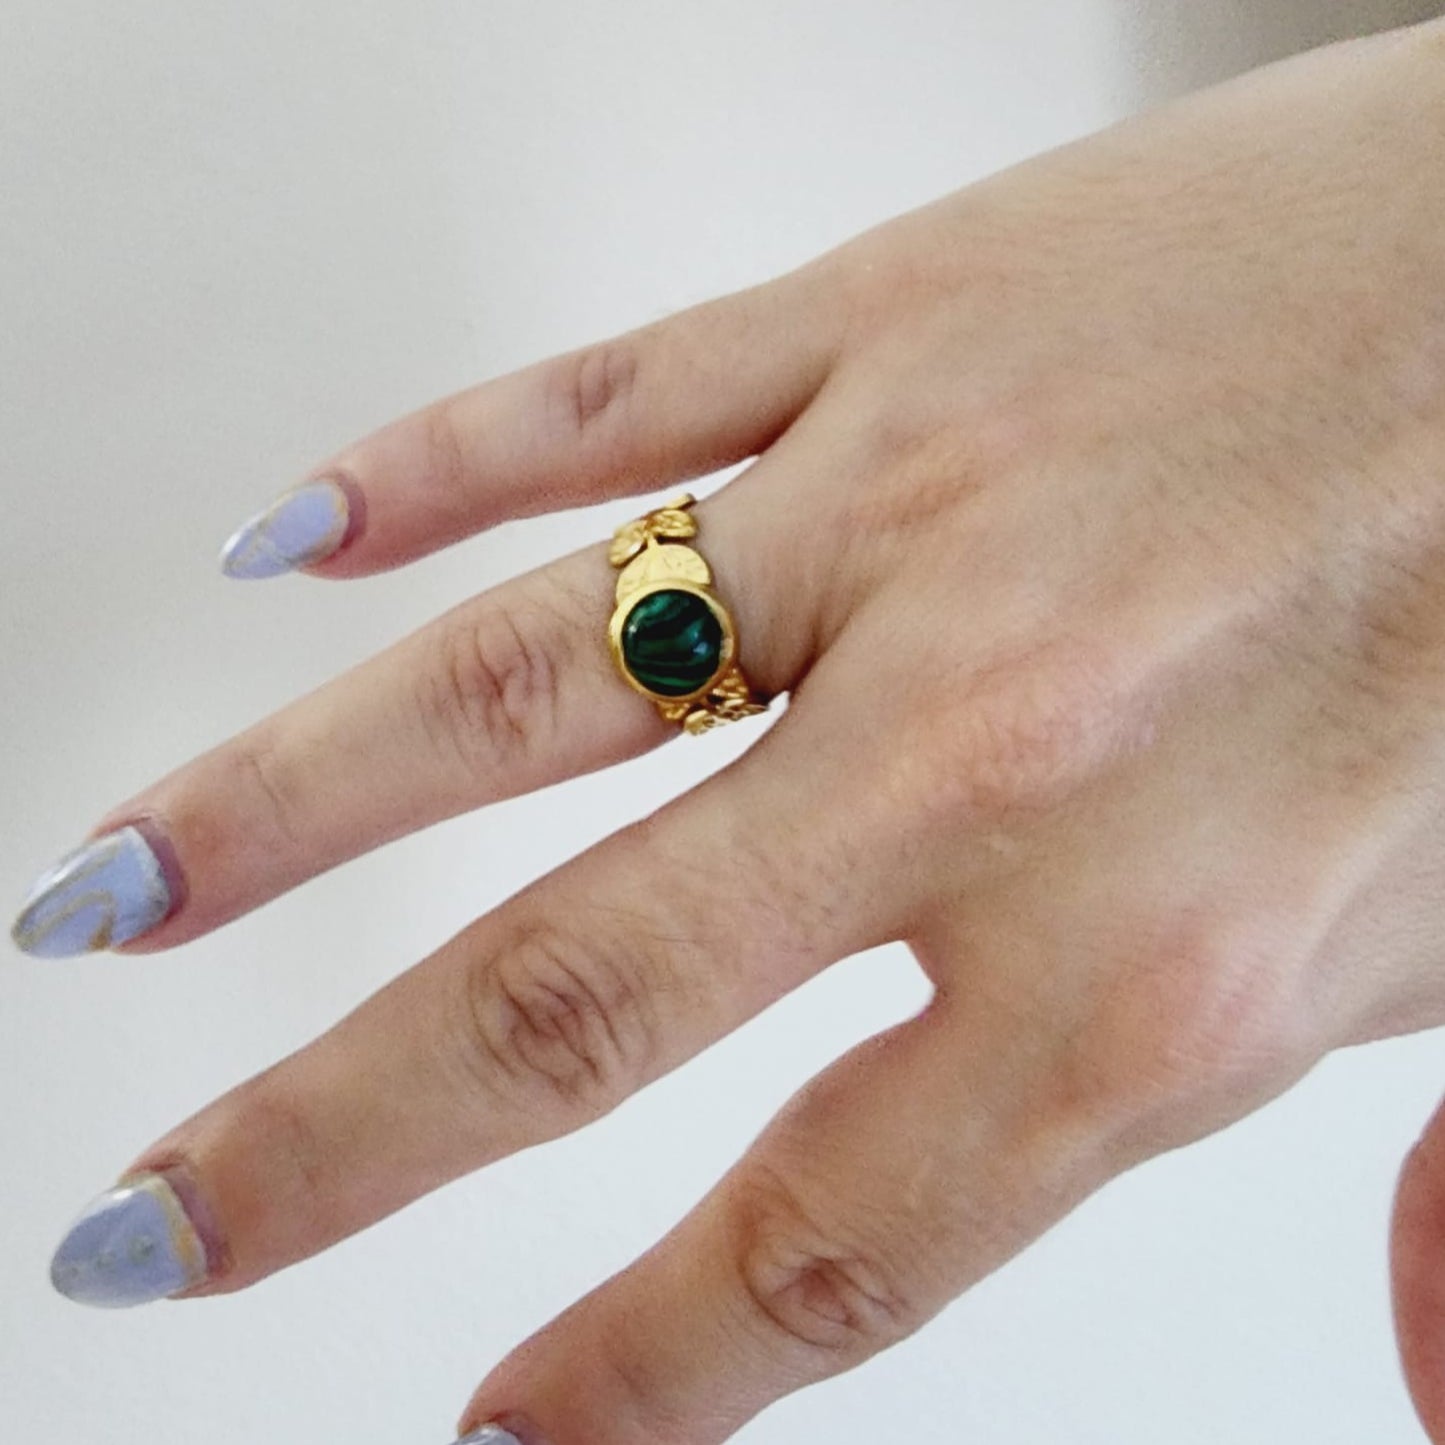 Emerald ring, Star ring, Adjustable bold ring, Adjustable Gold ring, Delicate and simple ring, chunky star ring, green gold ring, waterproof ring, hypoallergenic ring, untarnish ring, anti tarnish ring, anillo de estrellas, Water Resistant Jewelry, green Stone ring, green leaves adjustable ring